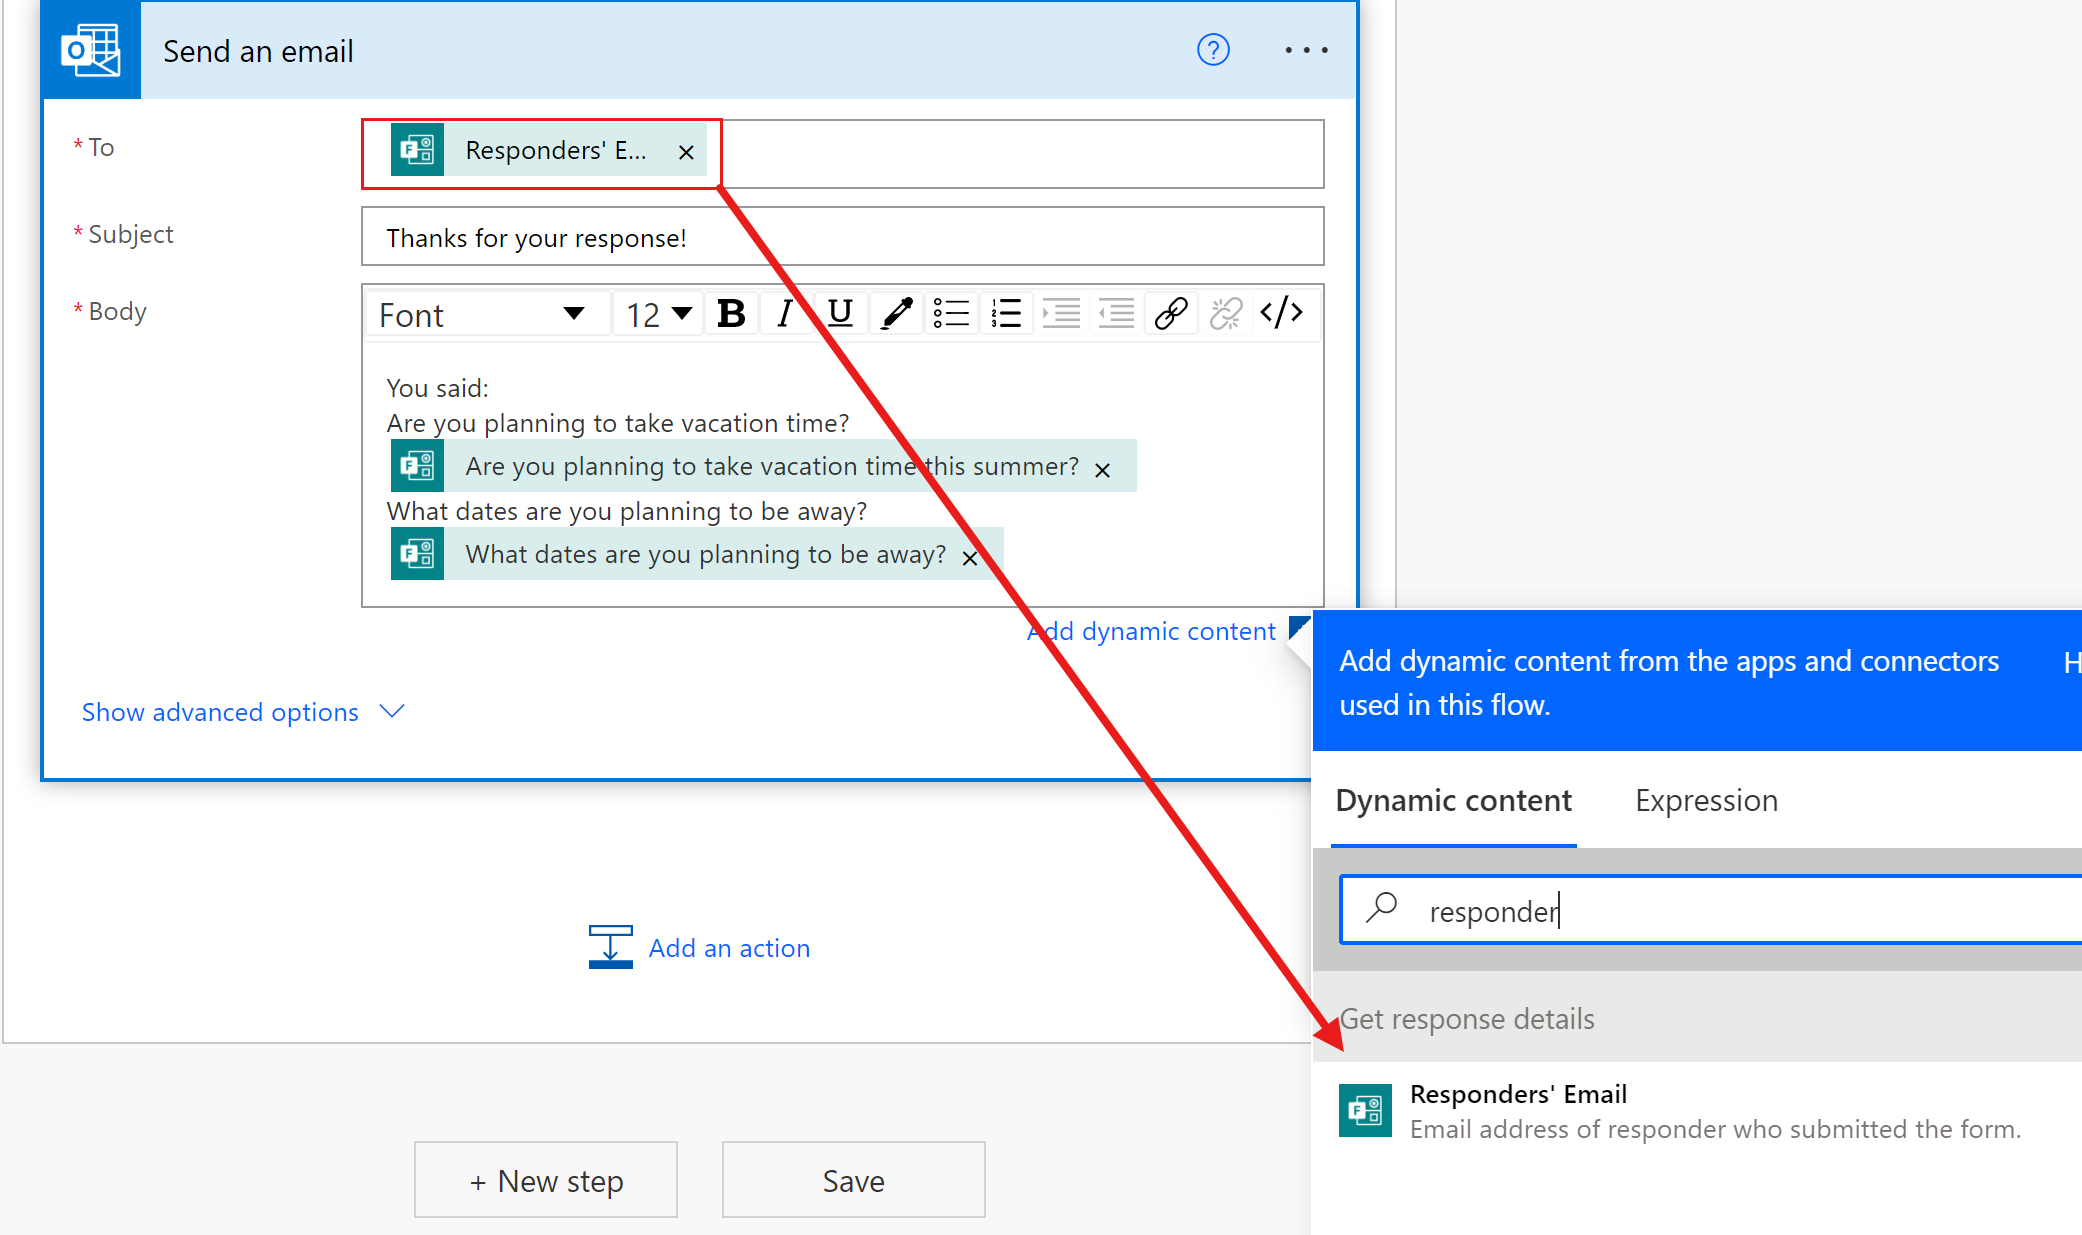 Screenshot of an Outlook send email action in a flow under construction, with the responder's email address highlighted.